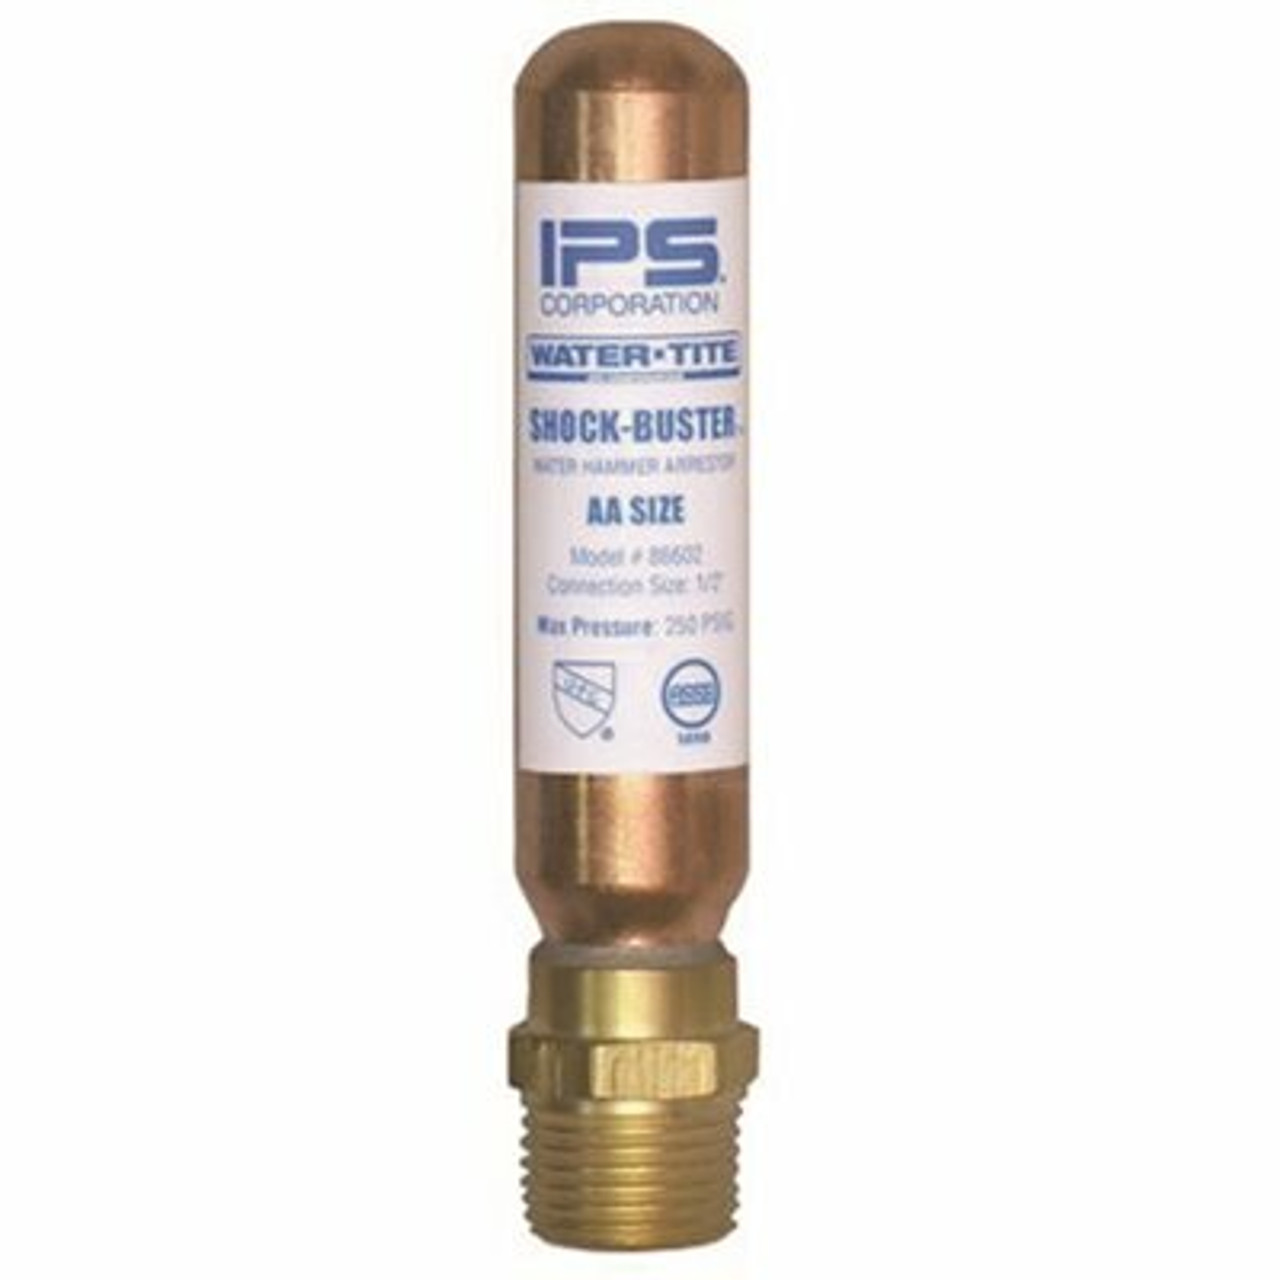 Ips Corporation Shock-Buster Water Hammer Lead Free 1/2 In. Mip Connection Arrestor